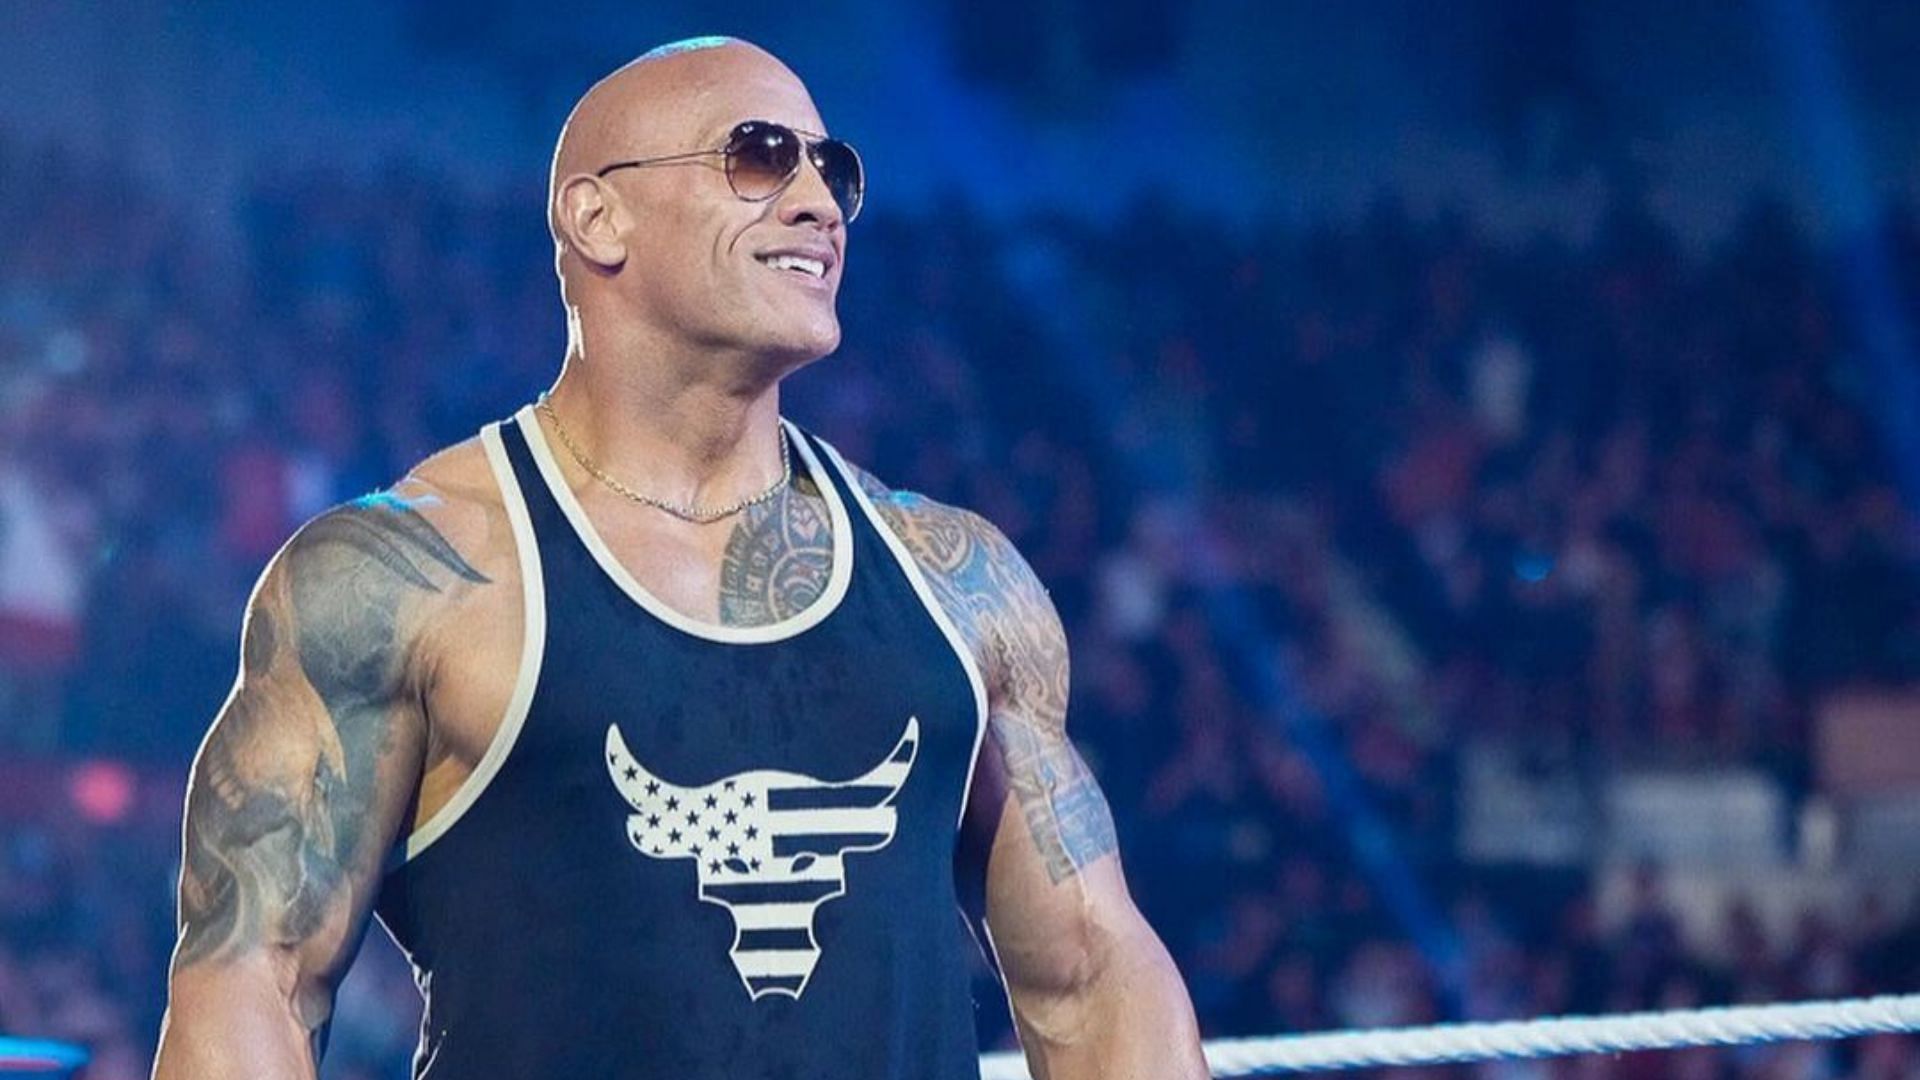 The Rock is now a board member of TKO Group